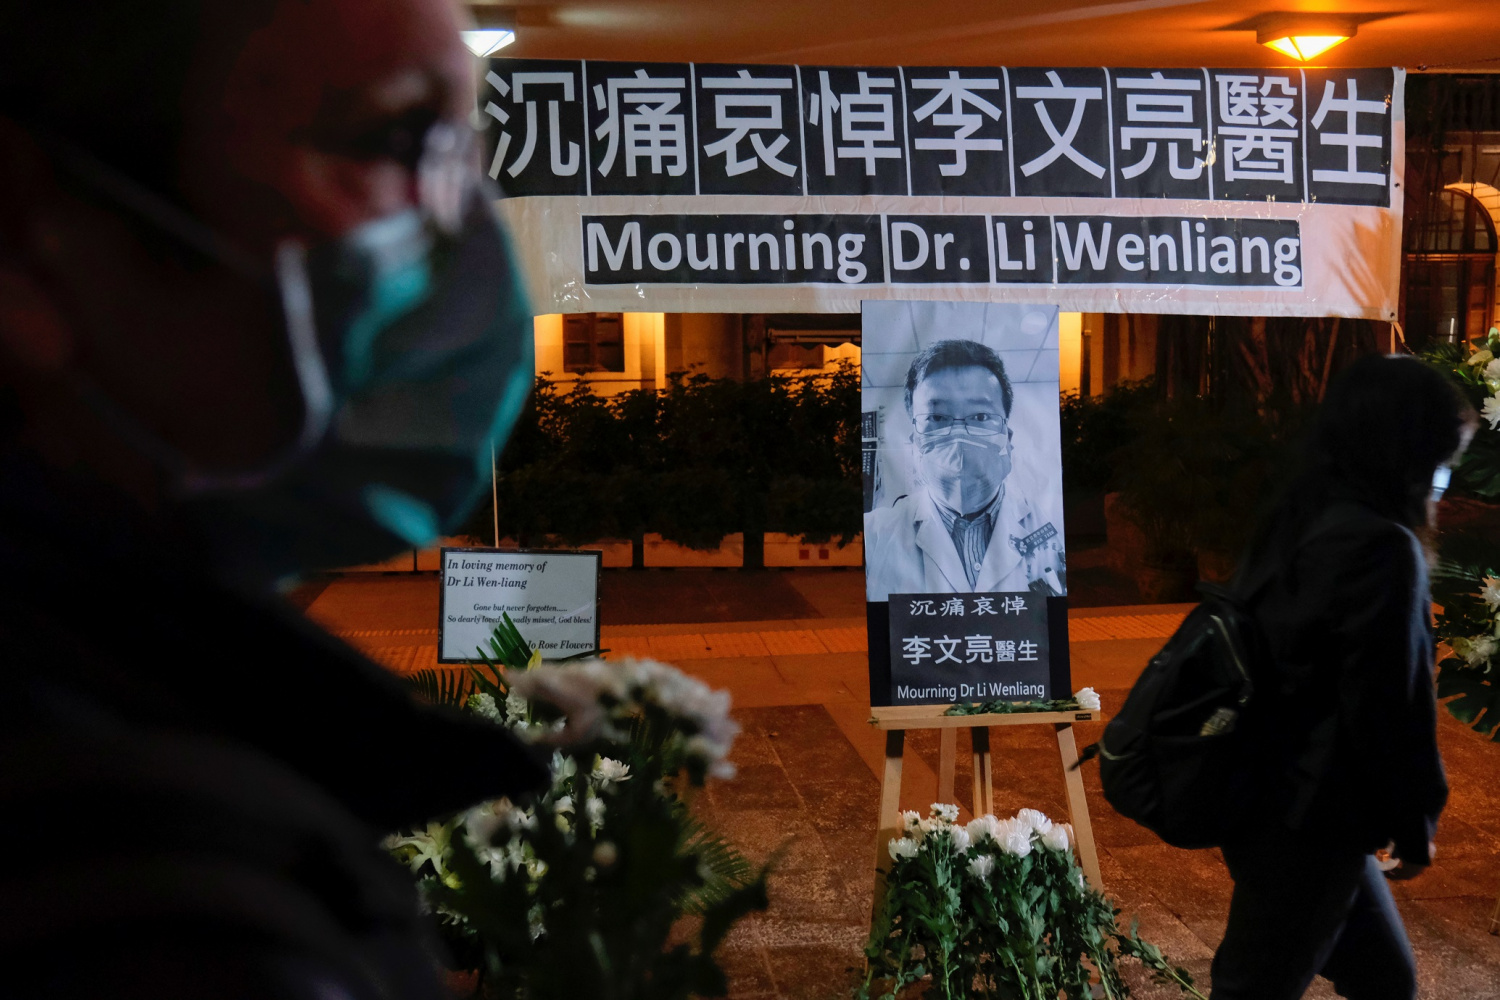 People wearing masks attend a vigil for late Li Wenliang, an ophthalmologist who died of coronavirus at a hospital in Wuhan